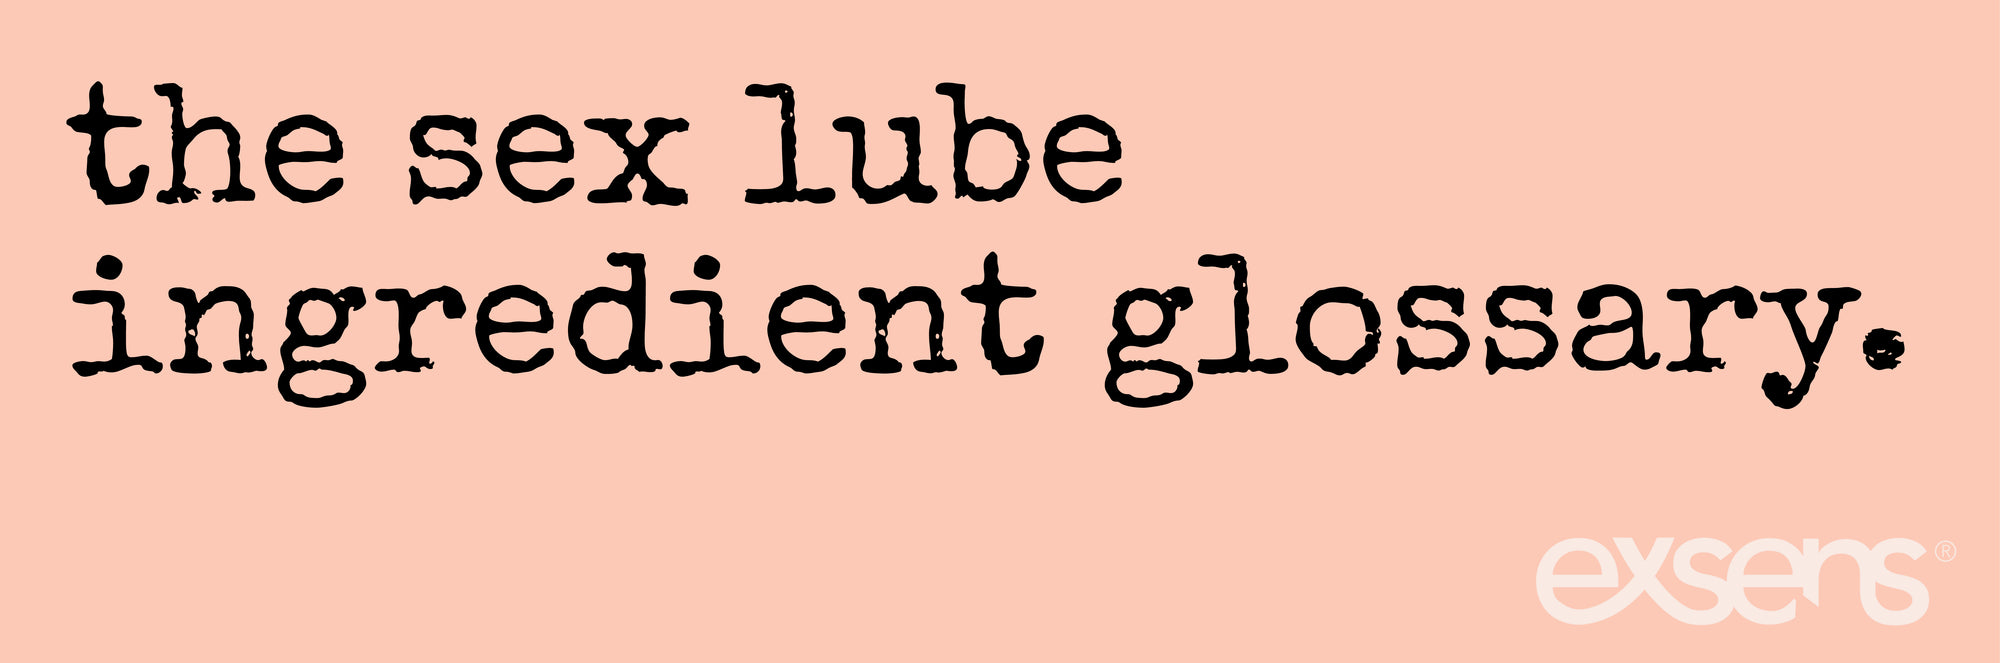 Lube Lessons 3 The Sex Lube Ingredient Glossary photo